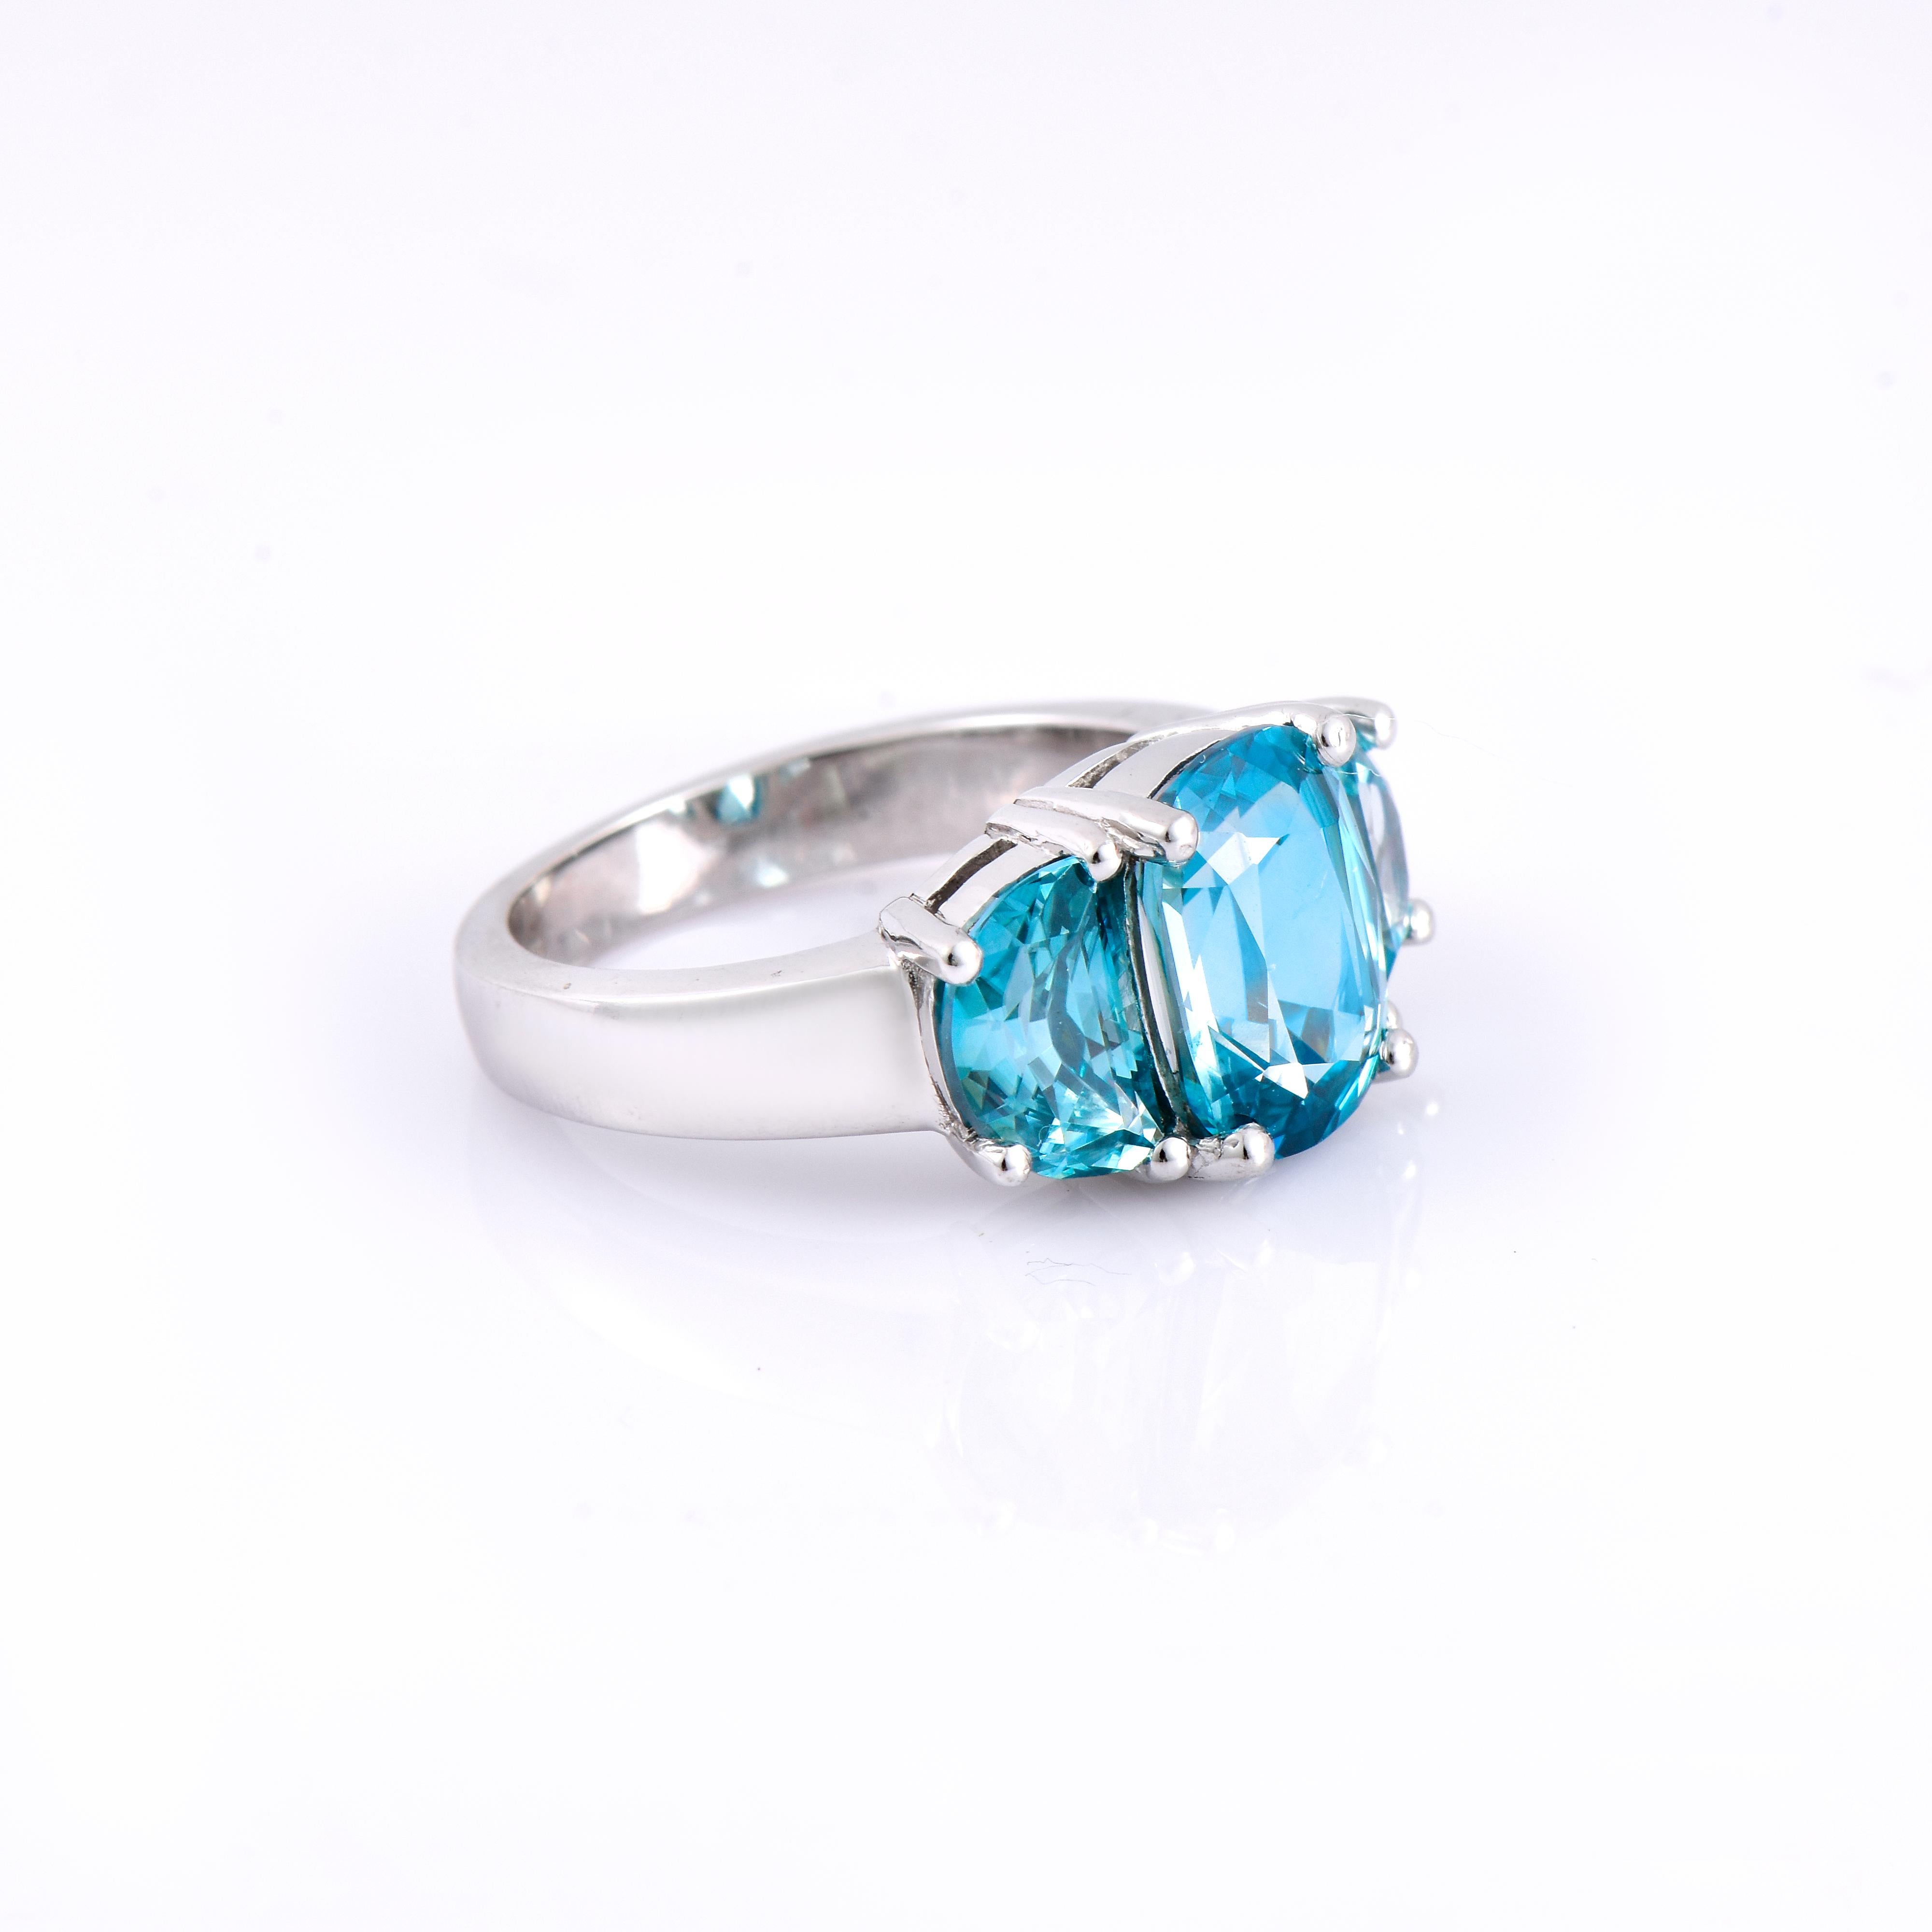 Mixed Cut Orloff of Denmark, 8.06 ct Natural Blue Zircon Ring in 925 Sterling Silver For Sale